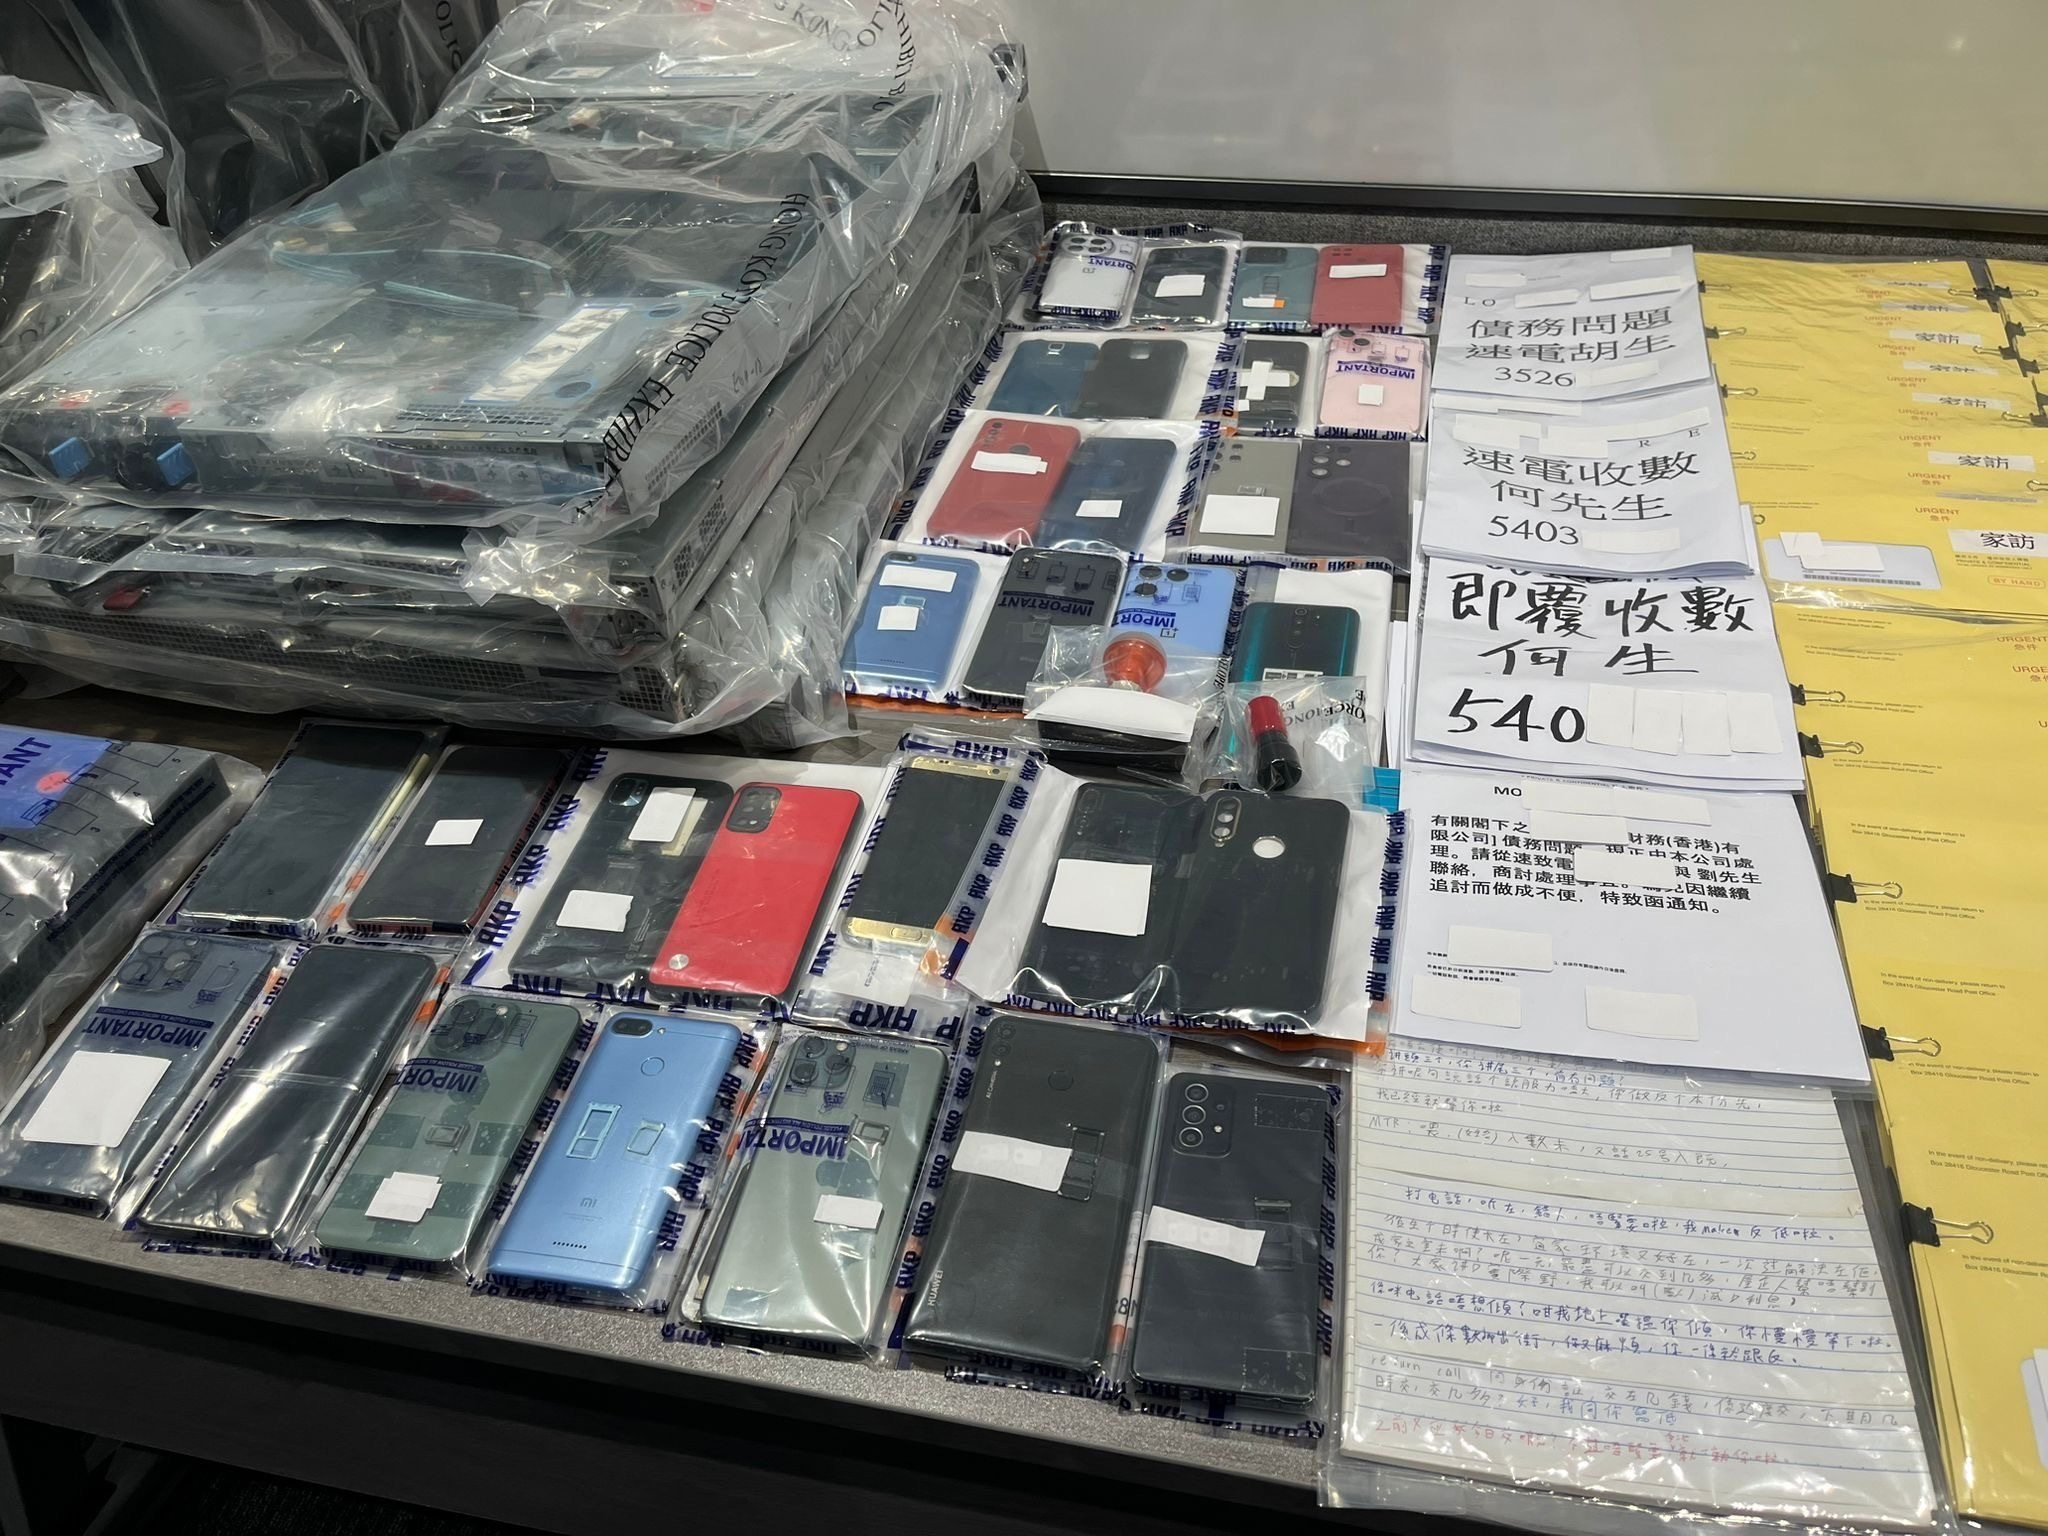 Hong Kong police found the personal information of a few thousand debtors in the loan shark syndicate’s office. Photo: Handout